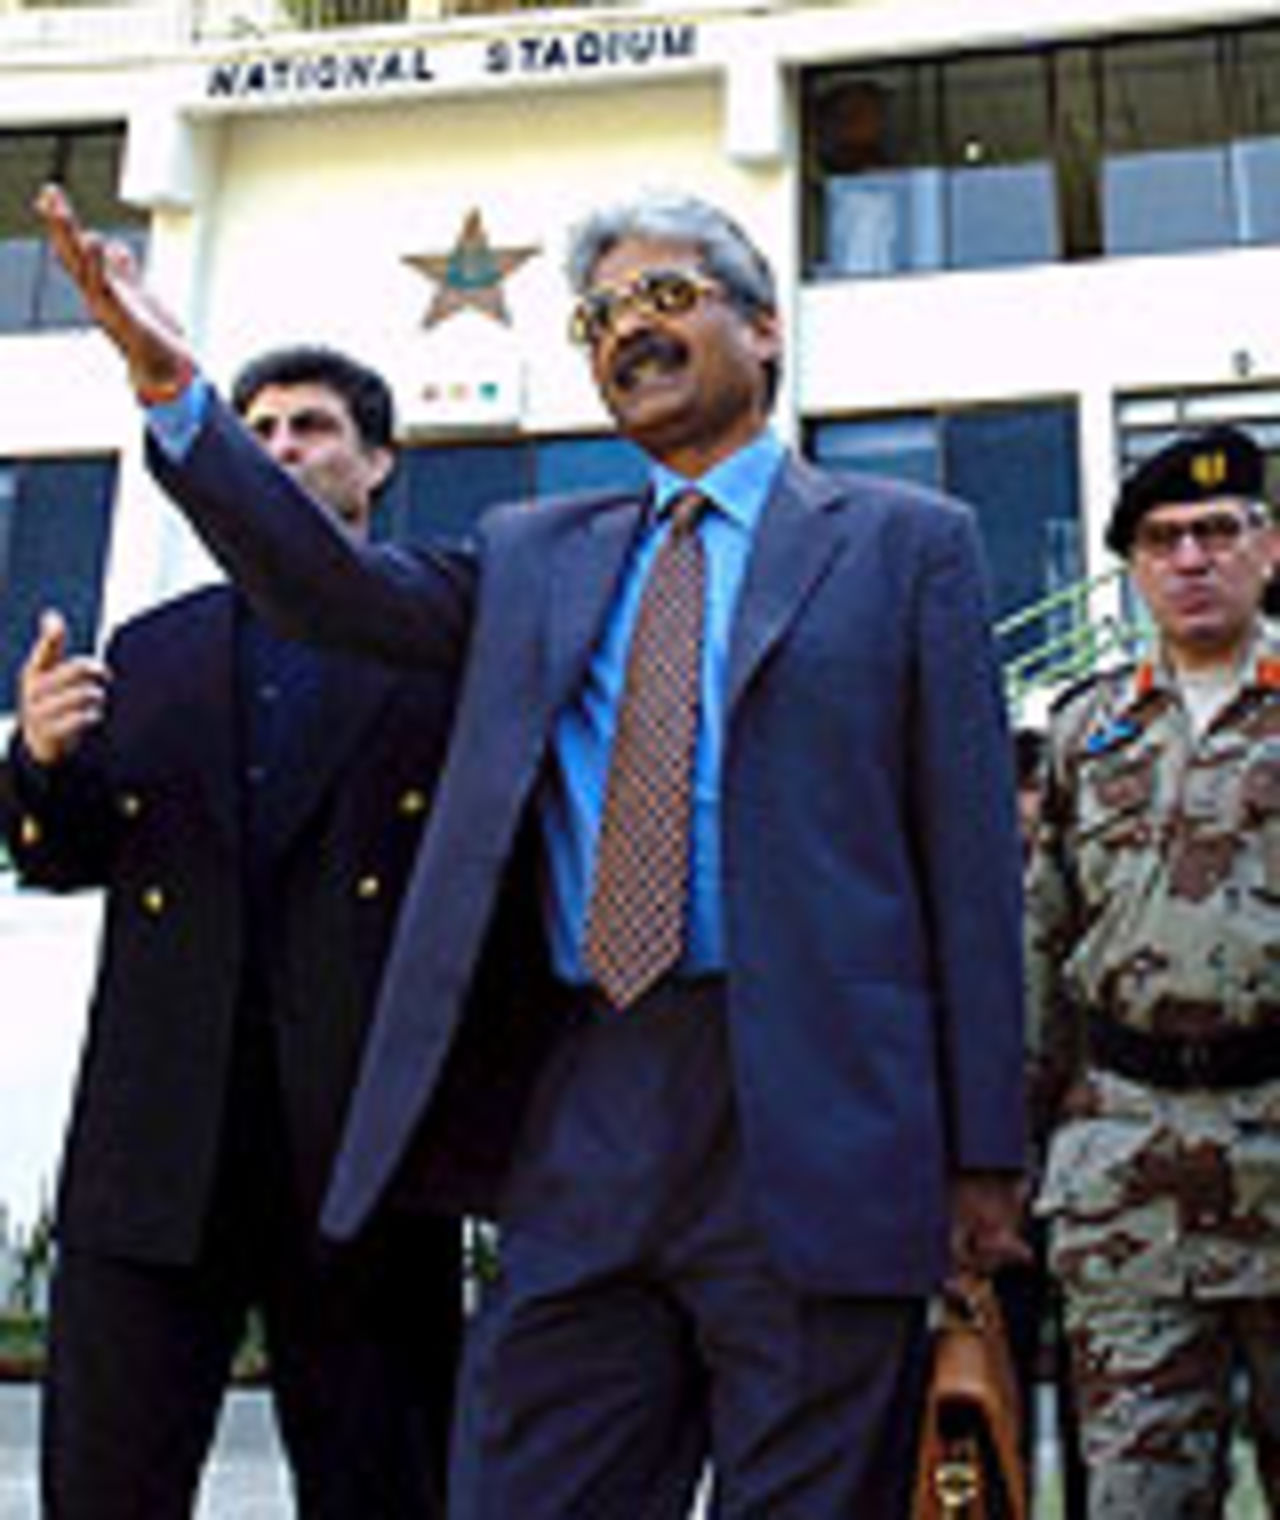 Yashovardhan Azad, a member of the BCCI's security delegation, checking out the facilities at Karachi's National Stadium, February 12, 2004